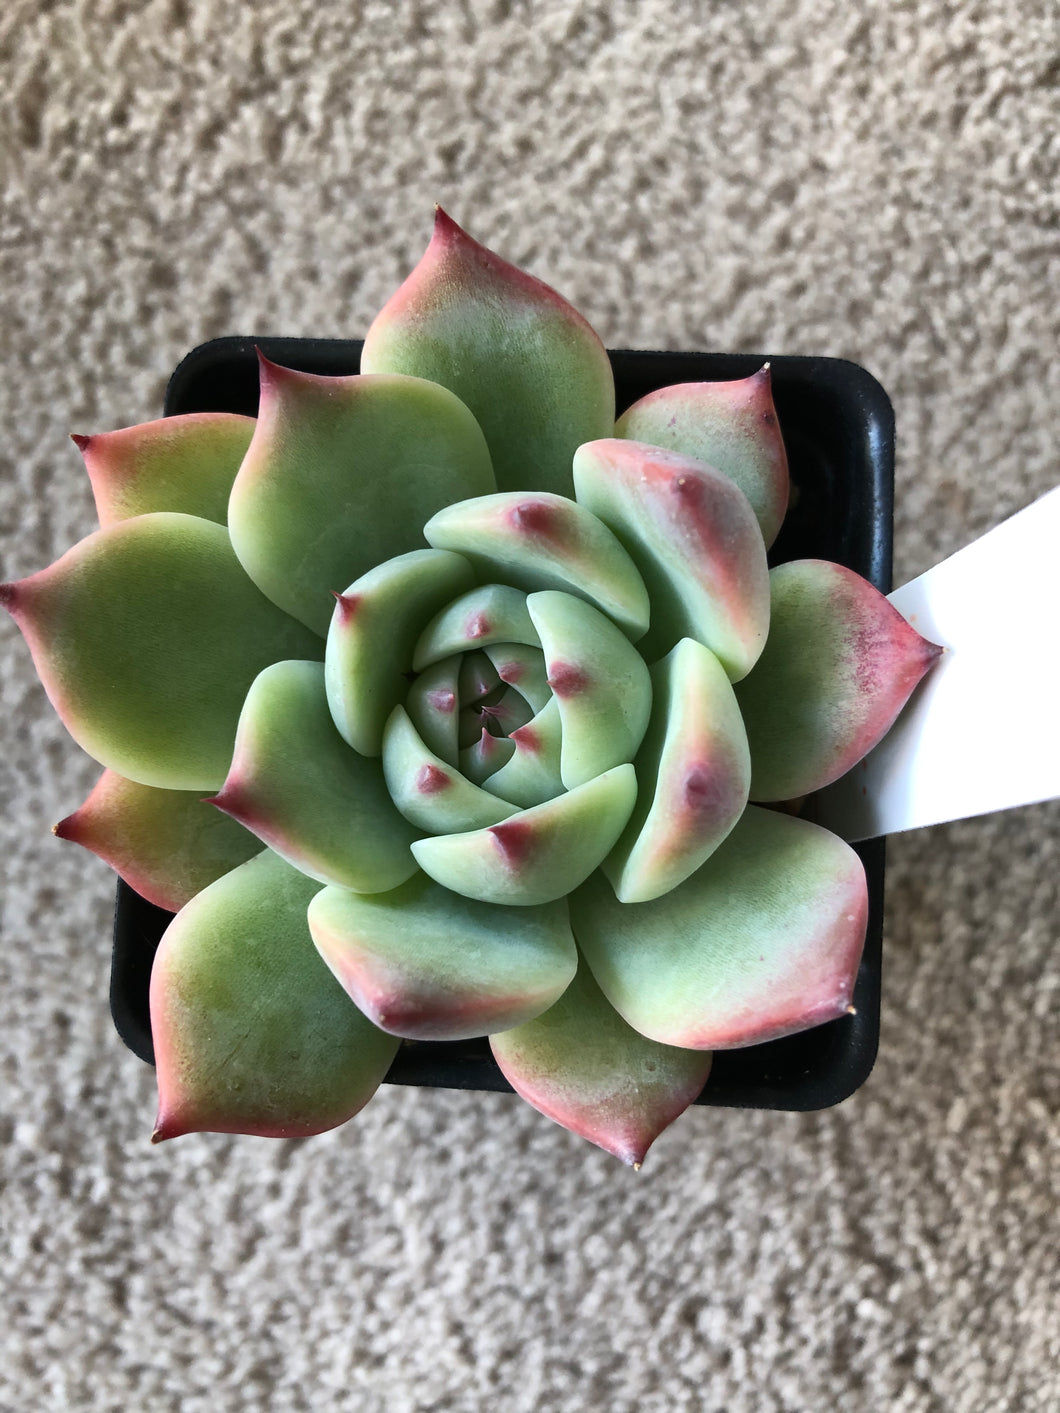 [US DISPATCH] Real Live Succulent Cactus Plant : Echeveria chihuahuaensis - Only available to US customers